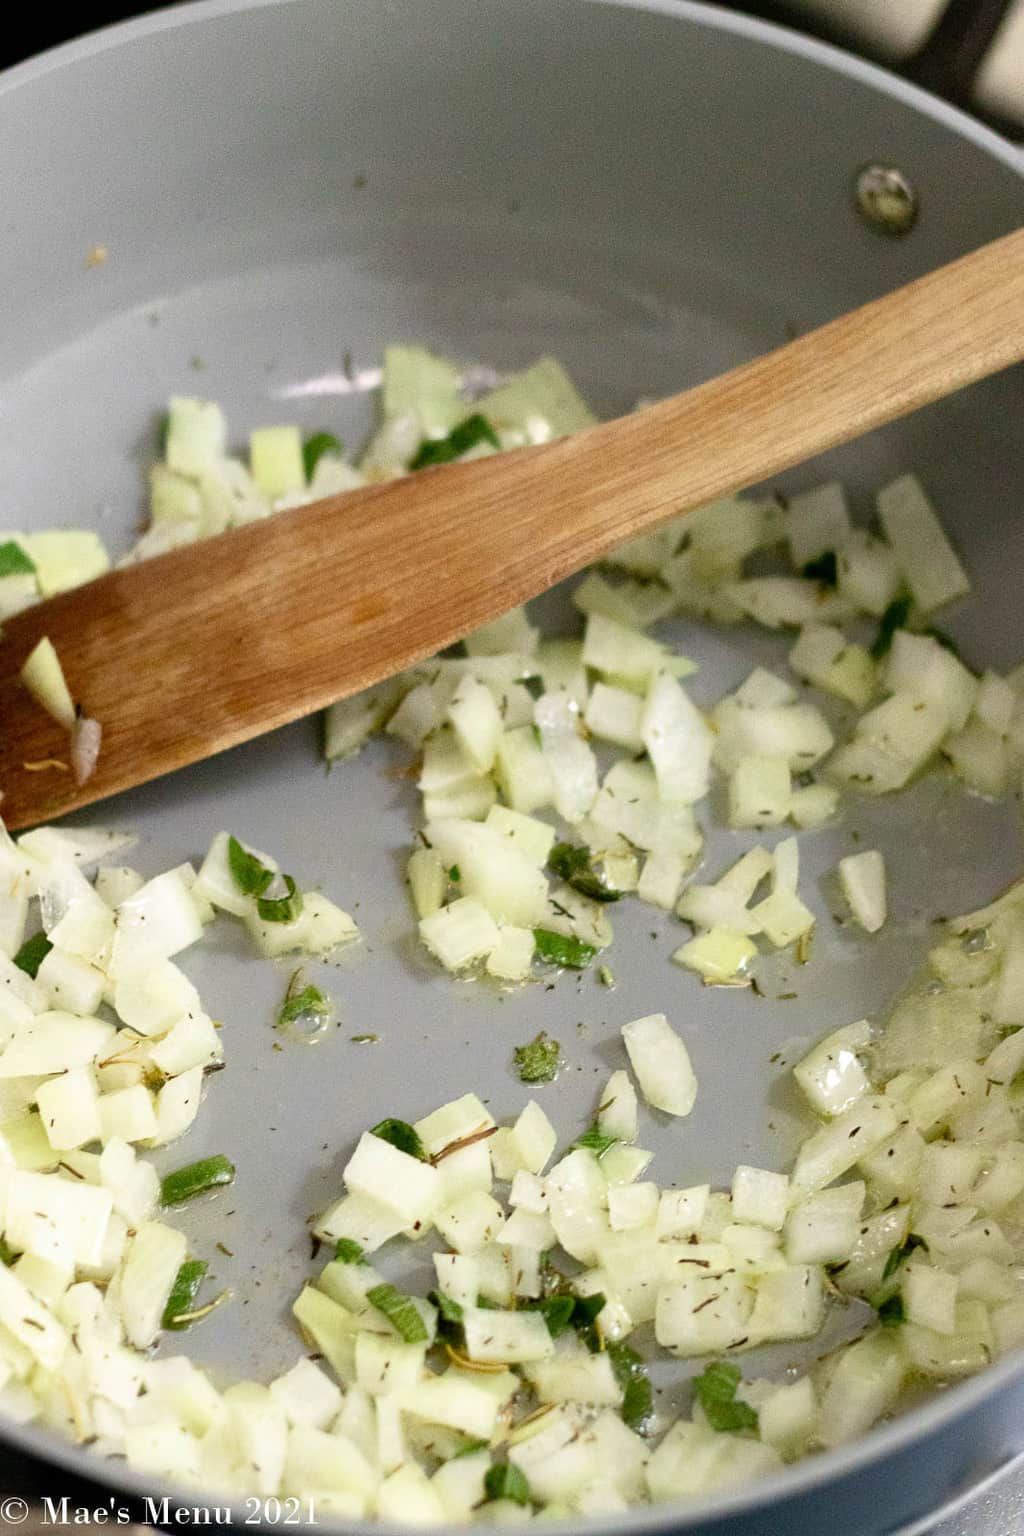 An up-close shot of onions and herbs sauteing in a pan